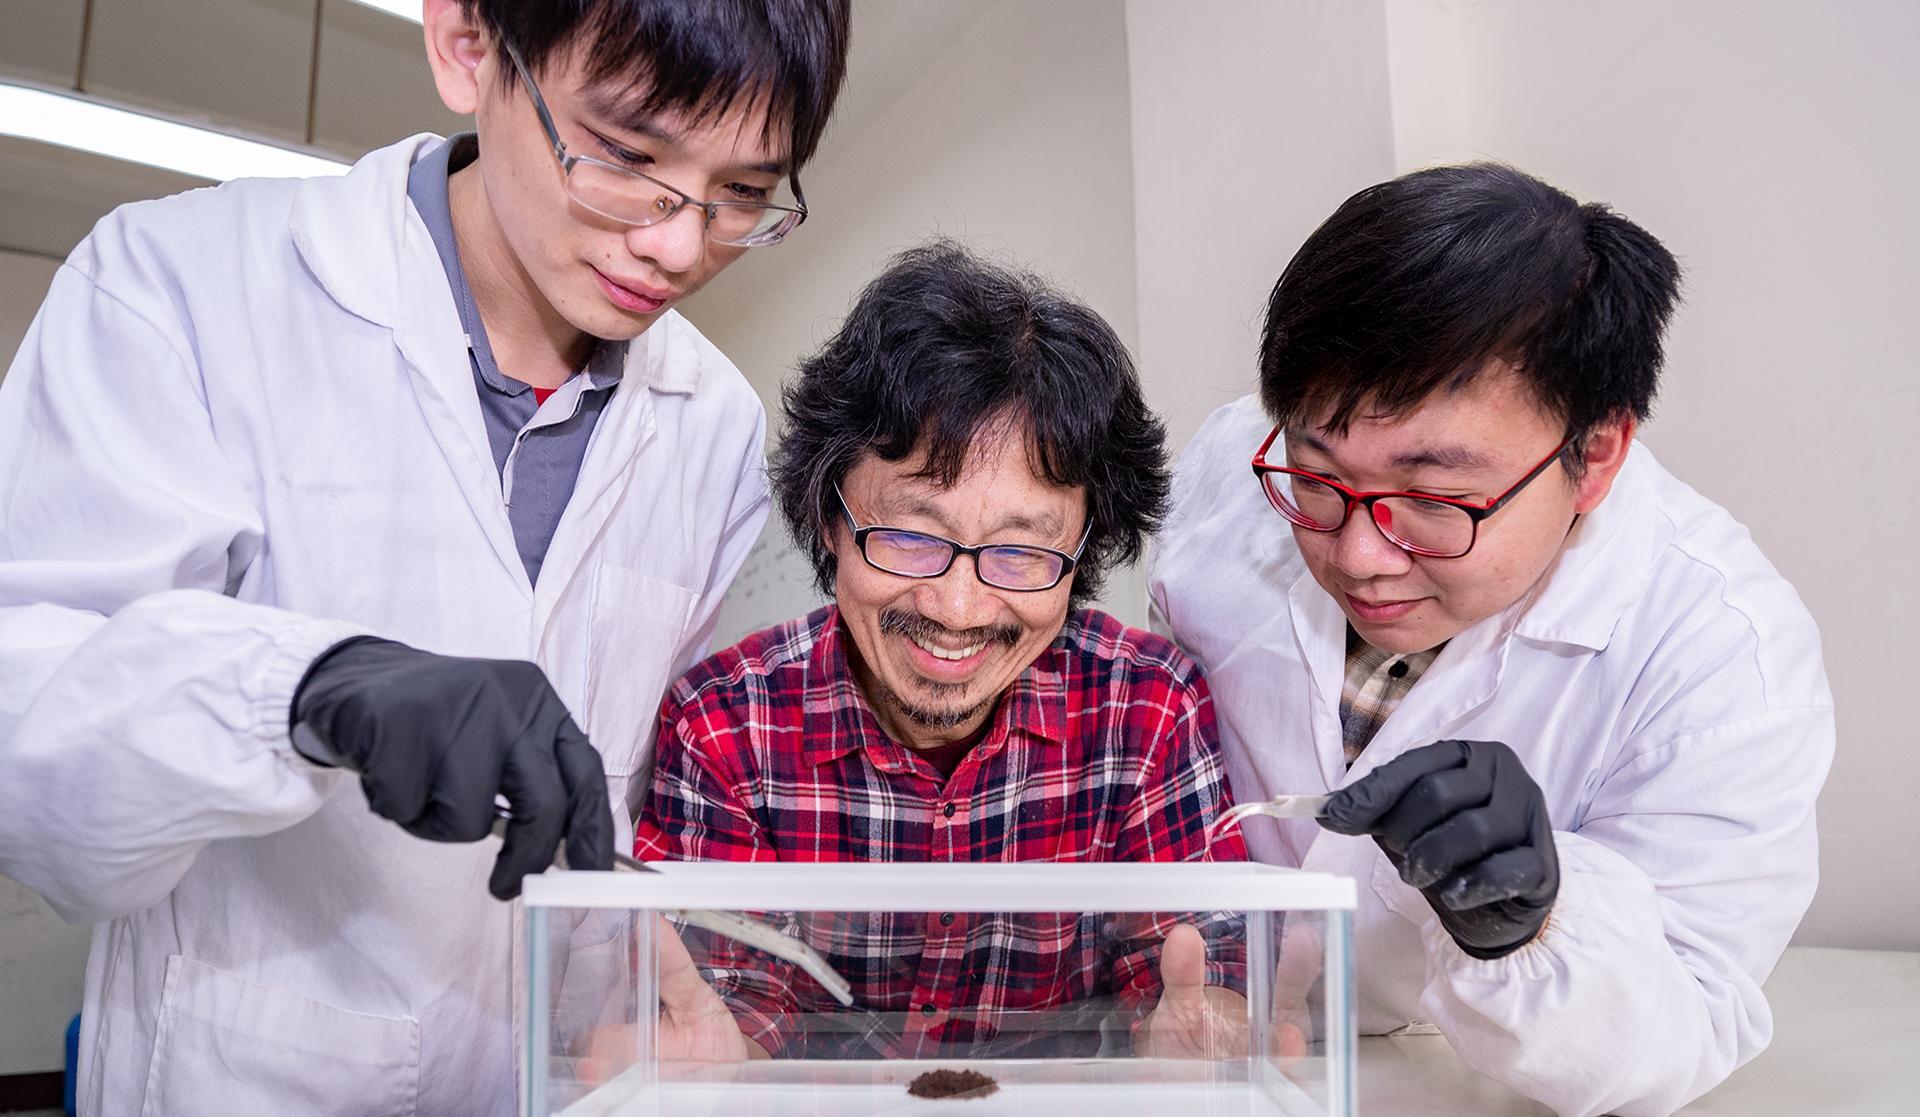 Professor Tzay-Ming Hong (洪在明) (center) from the Department of Physics at NTHU guides graduate students Chung-Hao Chen (陳中皓) (right) and Ting-Heng Hsieh (謝廷珩) (left) in researching the causes of fire ant rafting.